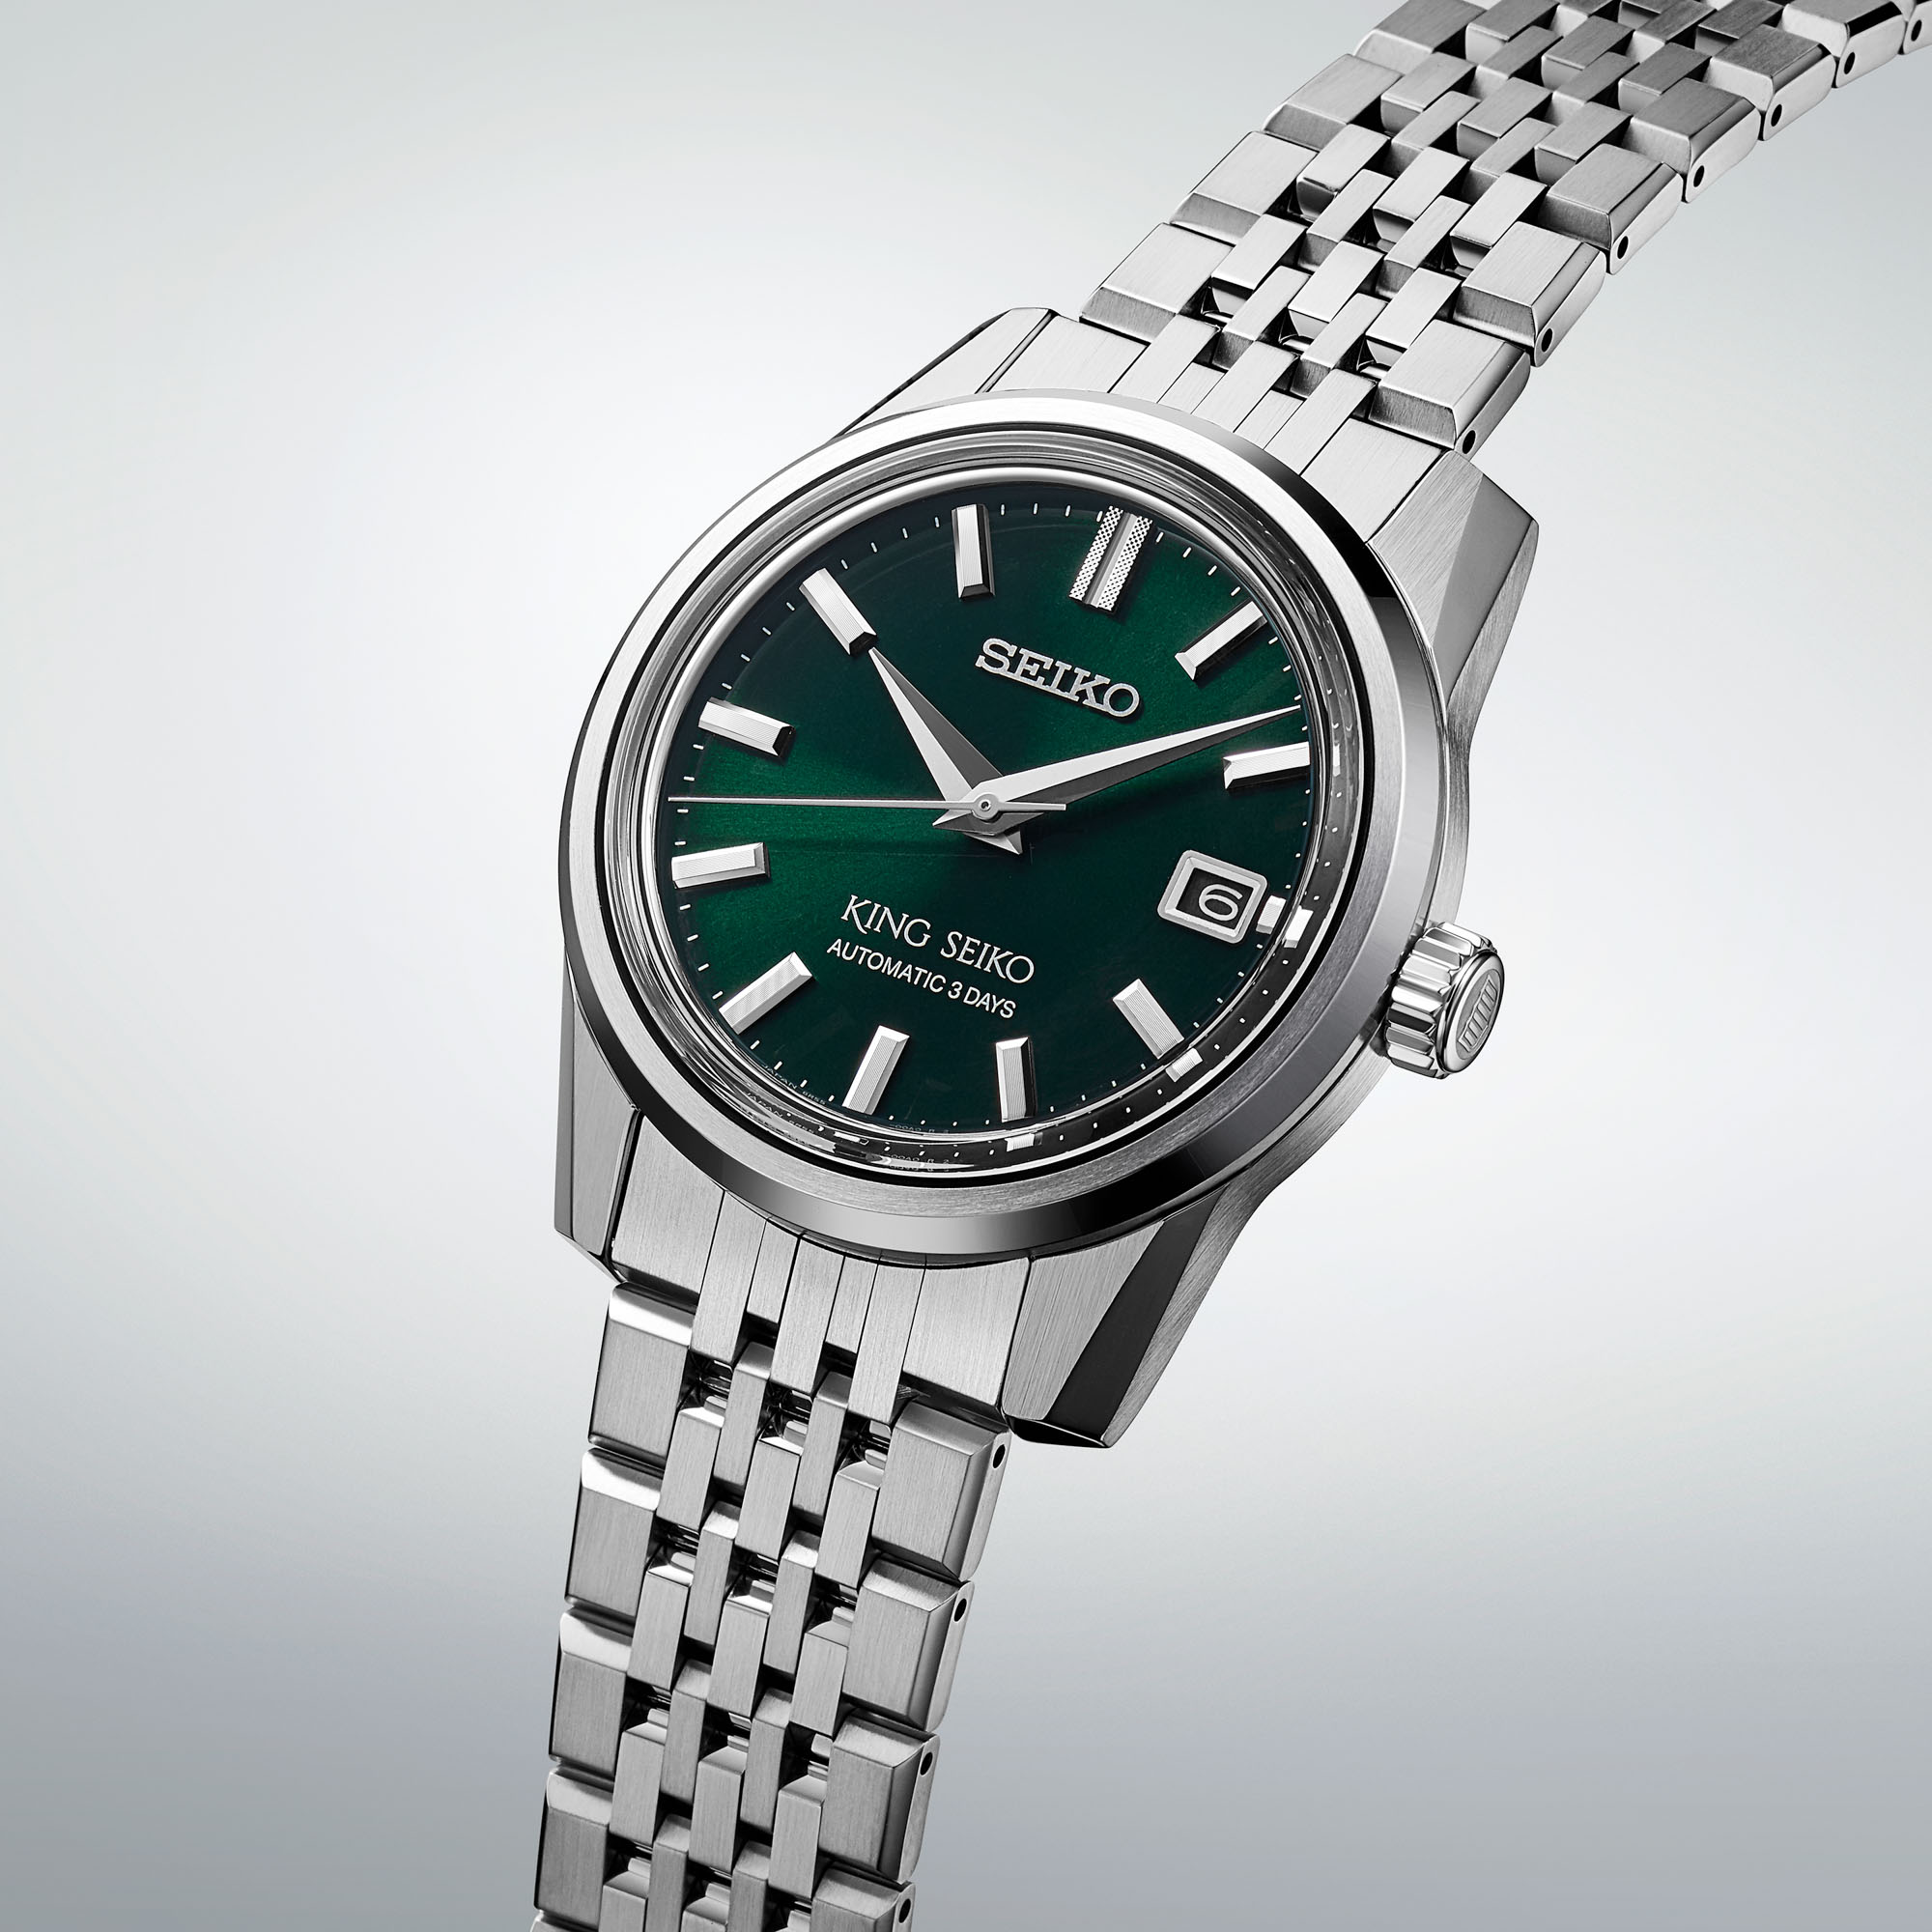 Unveils The Seiko Watchmaking Anniversary King Seiko SPB365 Watch And New Collection 39mm Models | aBlogtoWatch